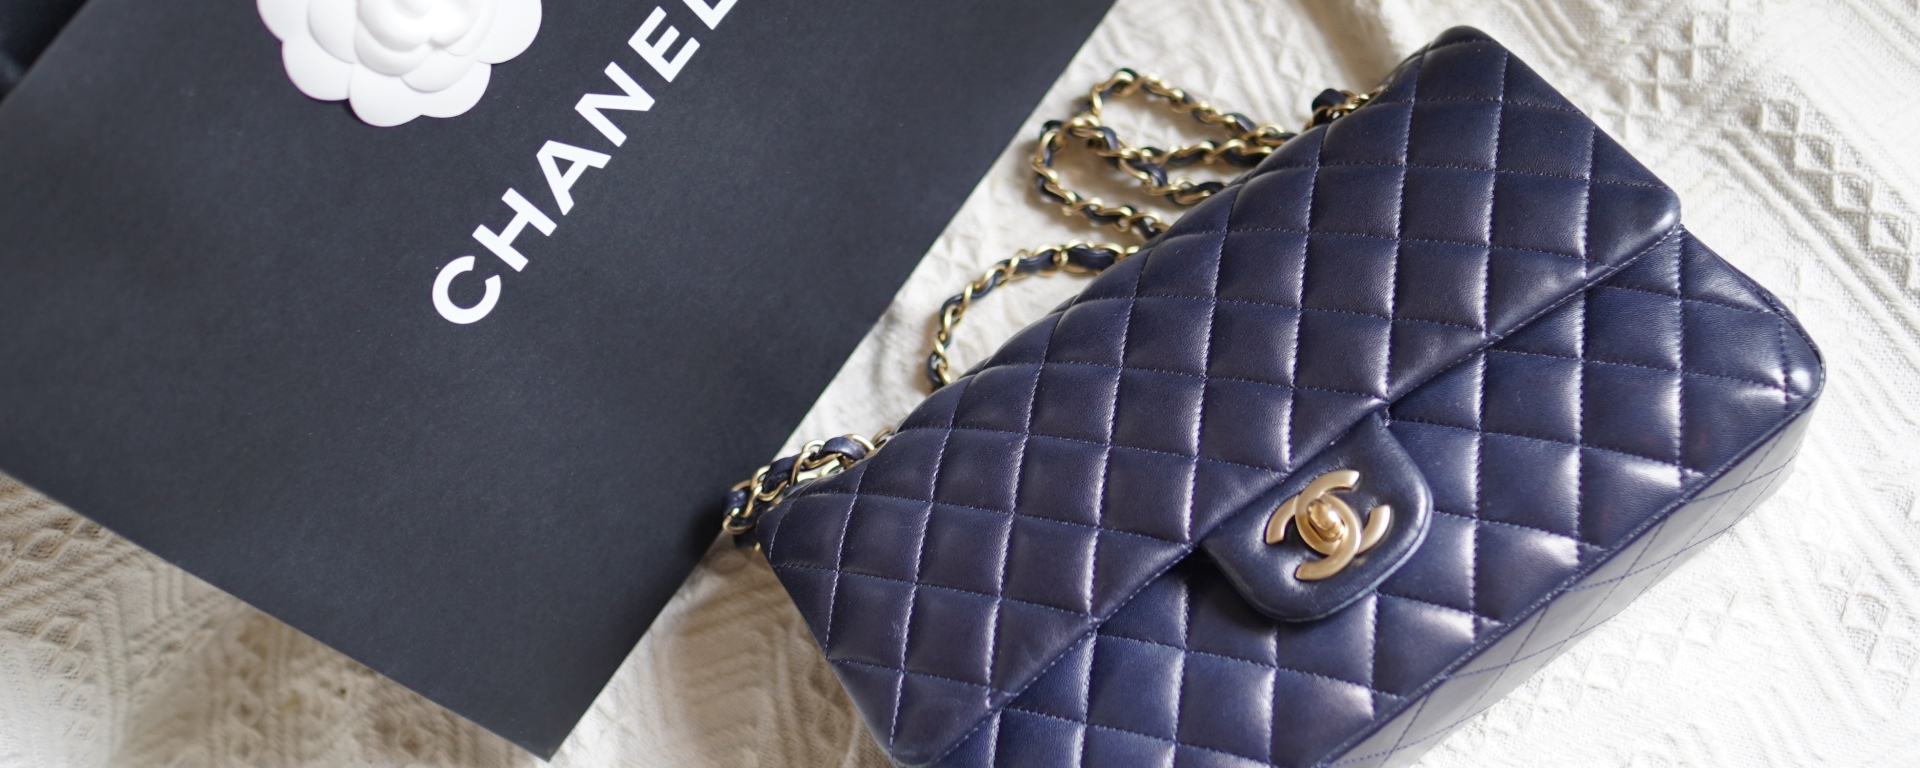 Chanel classic flap bag in midnight blue review & what's in my bag